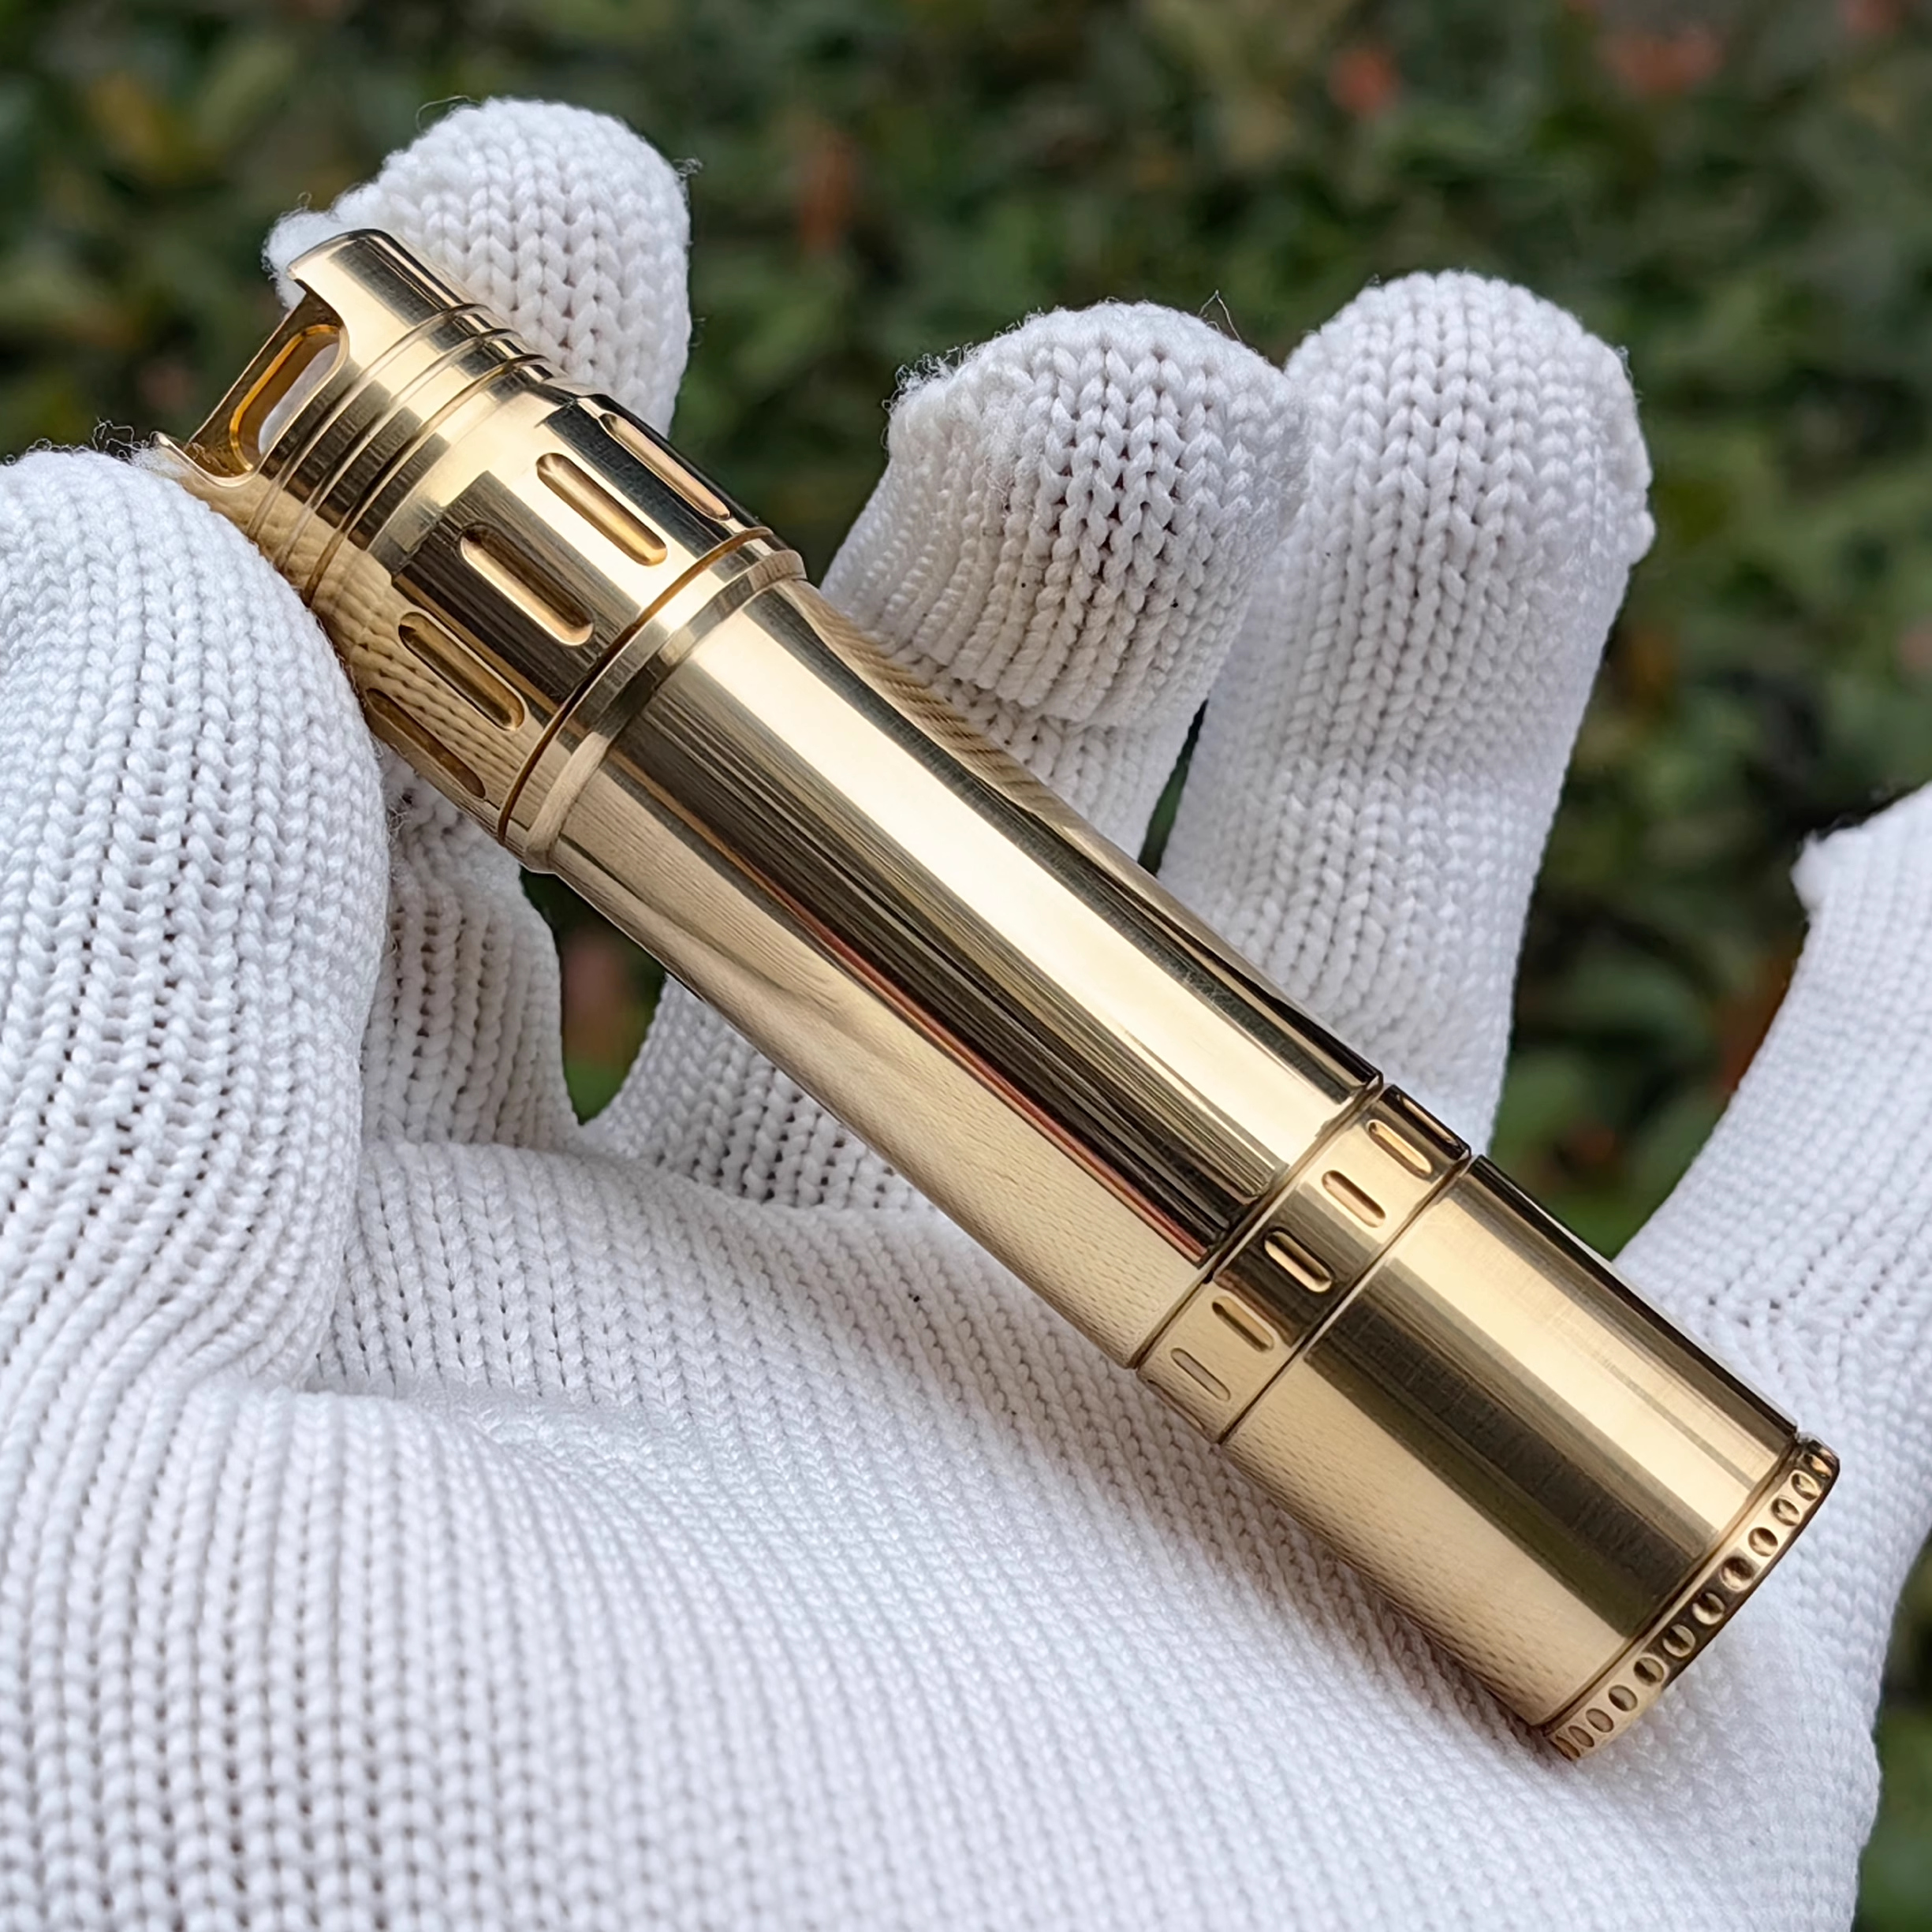 The latest limited edition lighter. Brass, stainless steel, titanium alloy